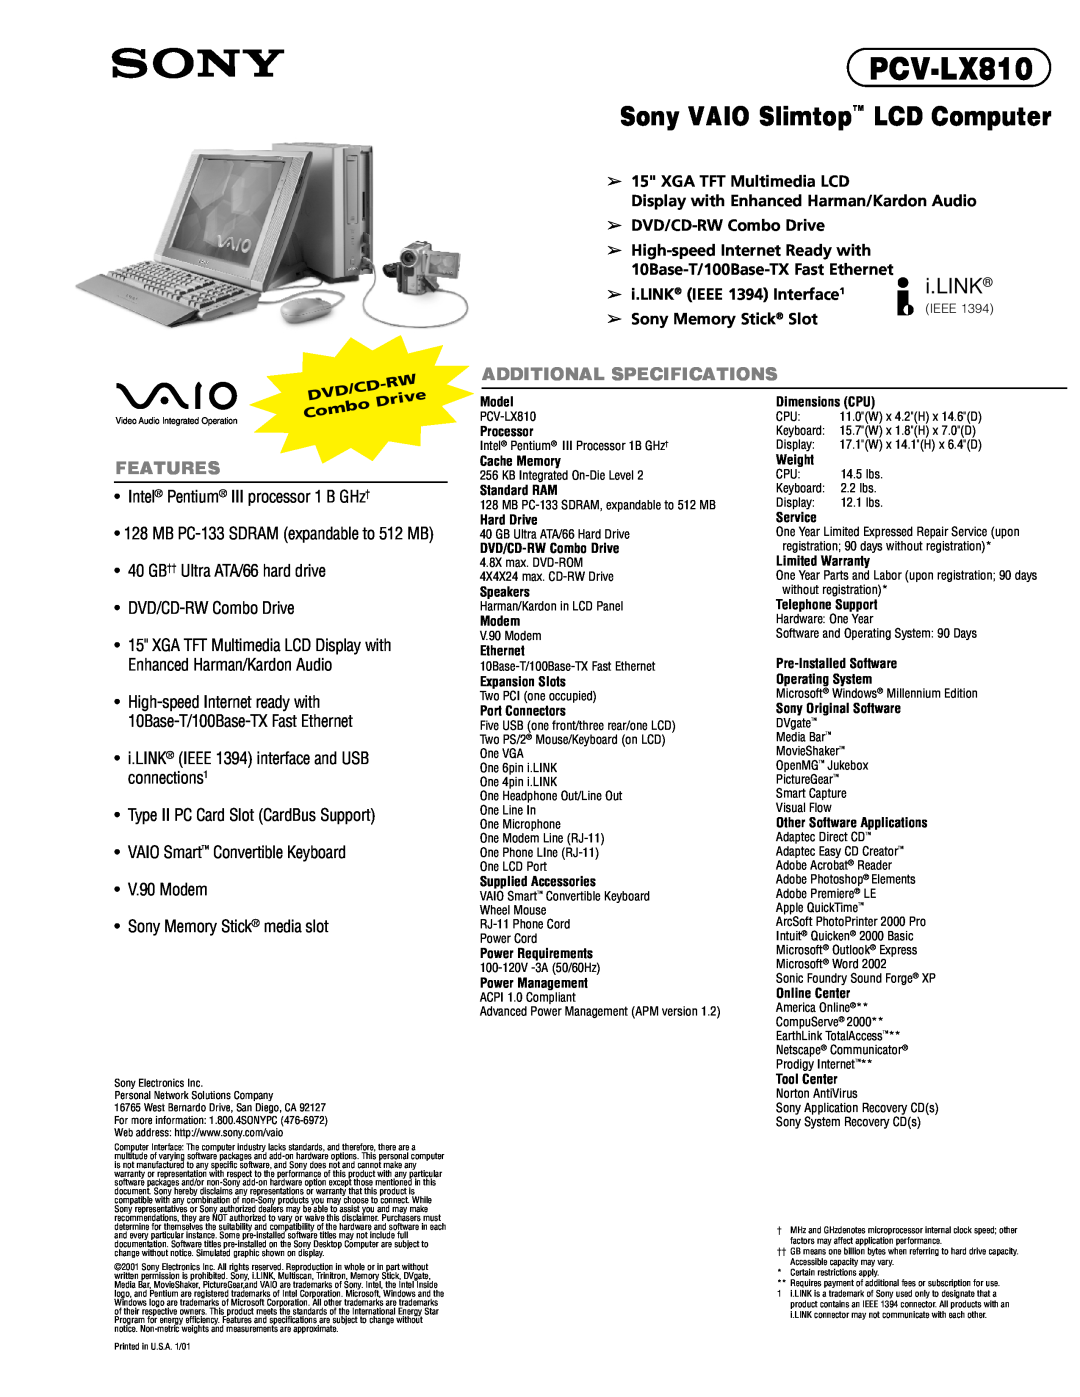 Sony PCV-LX810 dimensions Sony VAIO Slimtop LCD Computer, i.LINK, Additional Specifications, Features, Dvd/Cd, Drive 